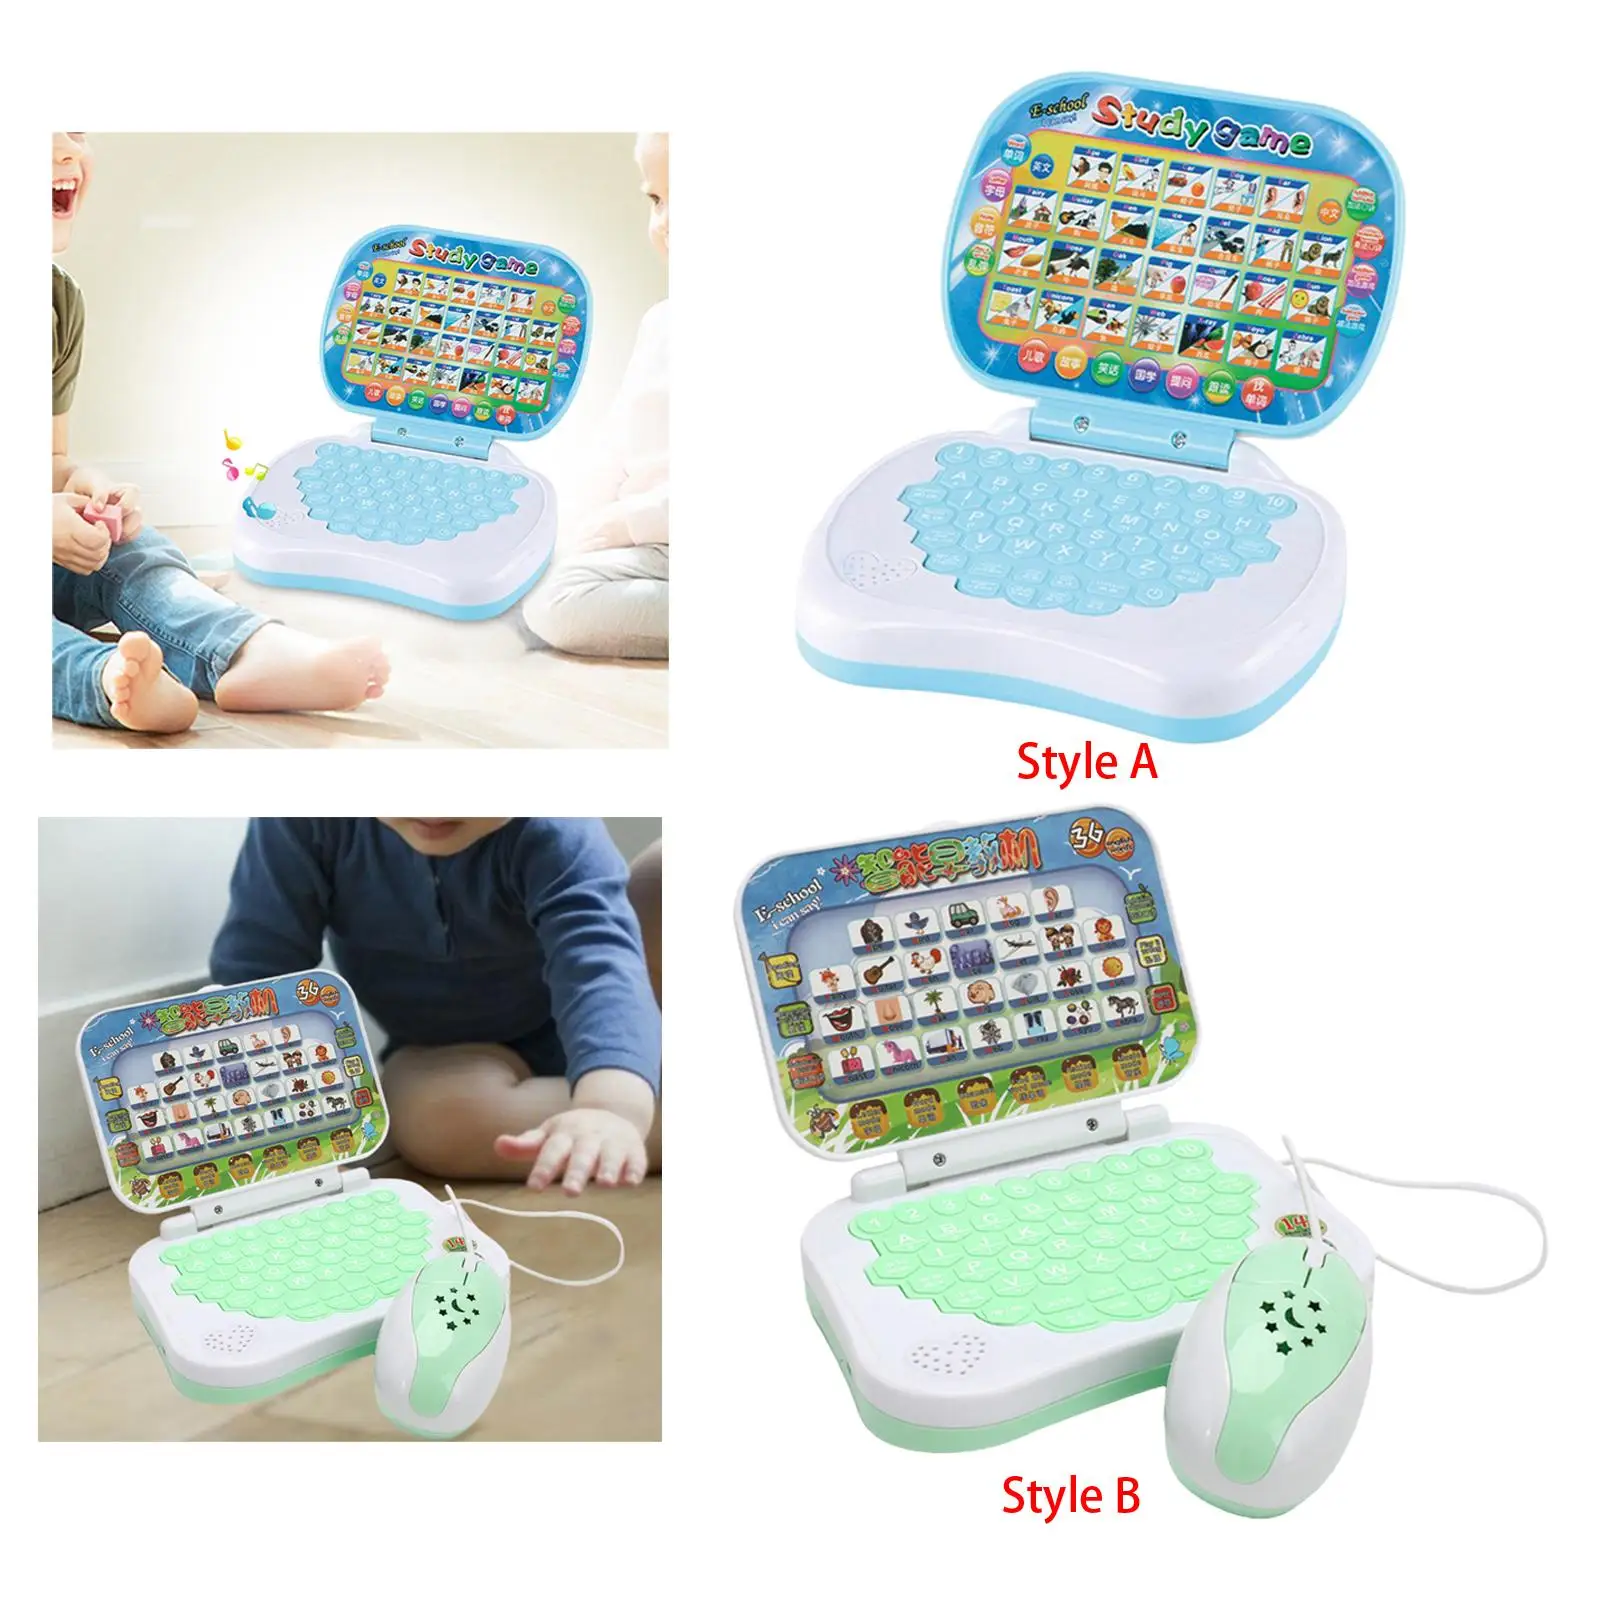 Multifunction Learning Machine,English Early Education Toy,Kids Laptop Toy for Children Bithday Gifts